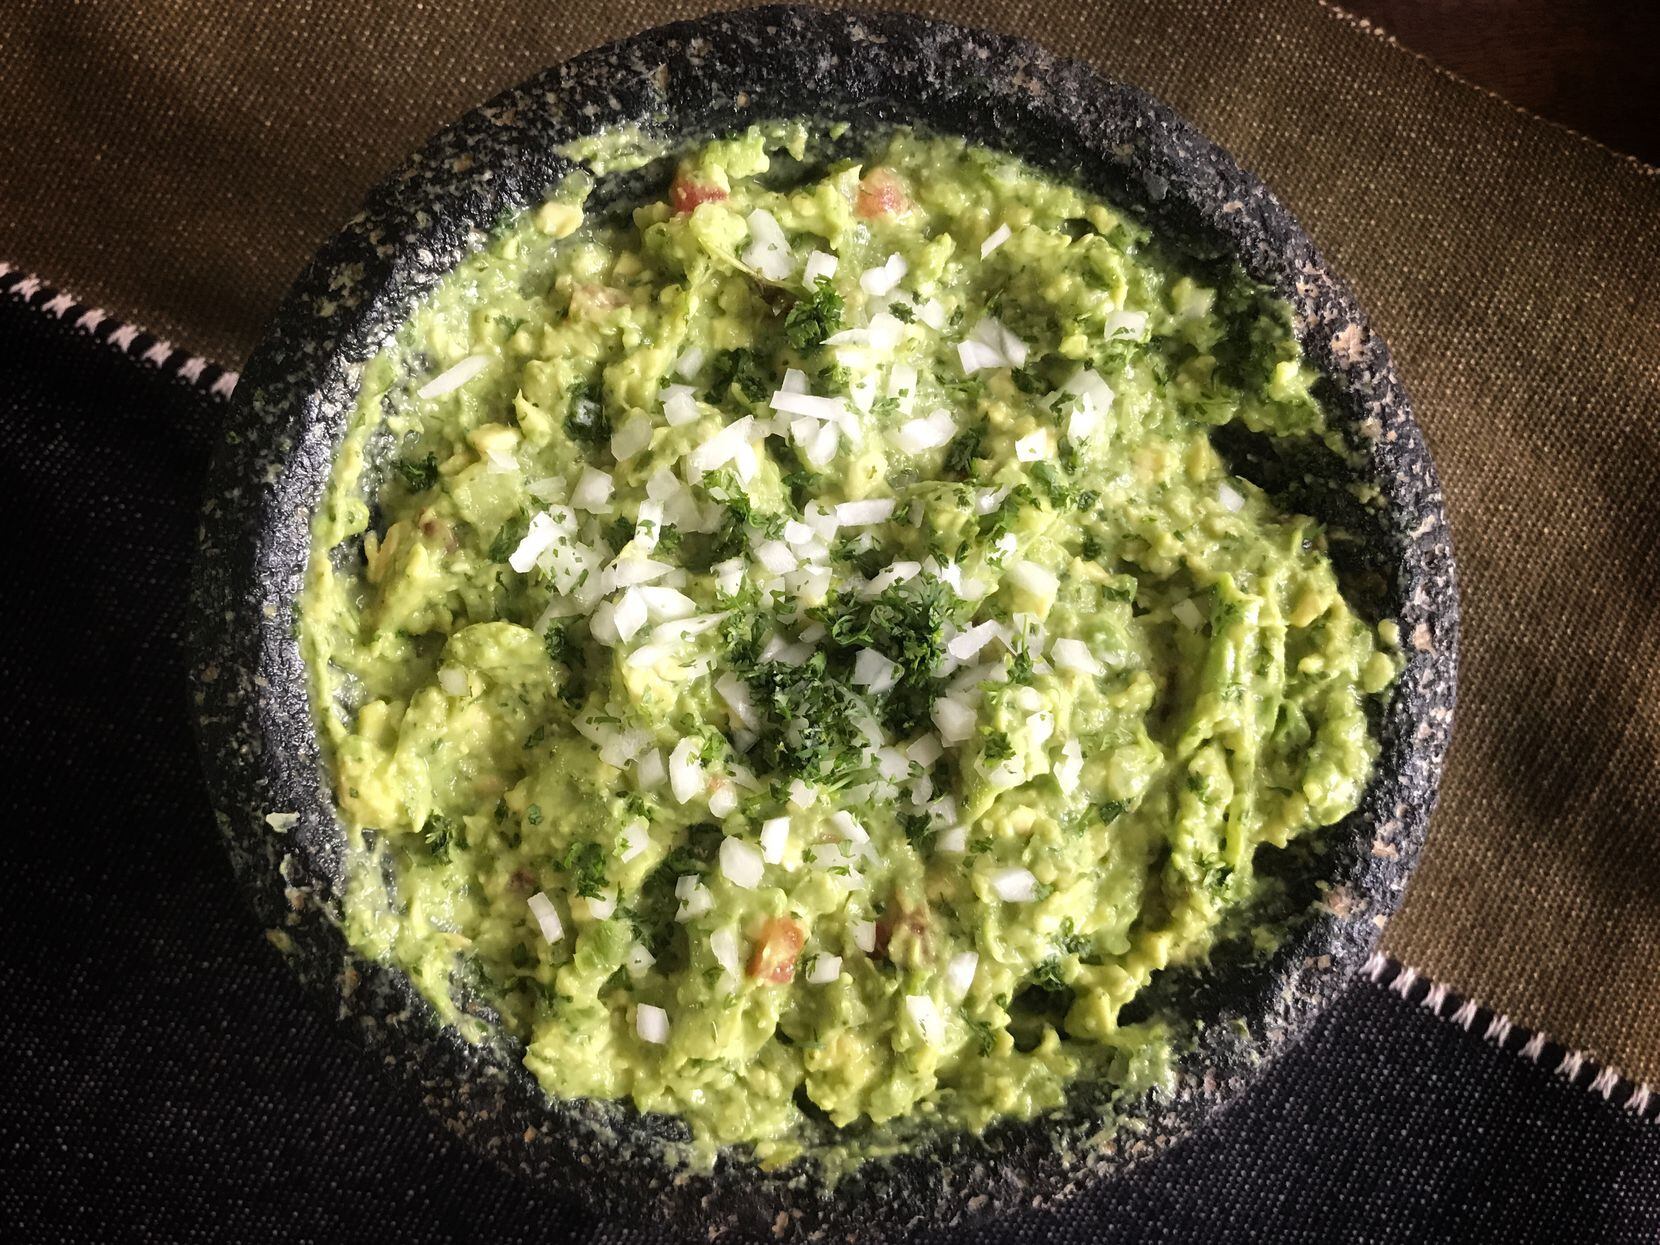 Guacamole recipe by Leslie Brenner